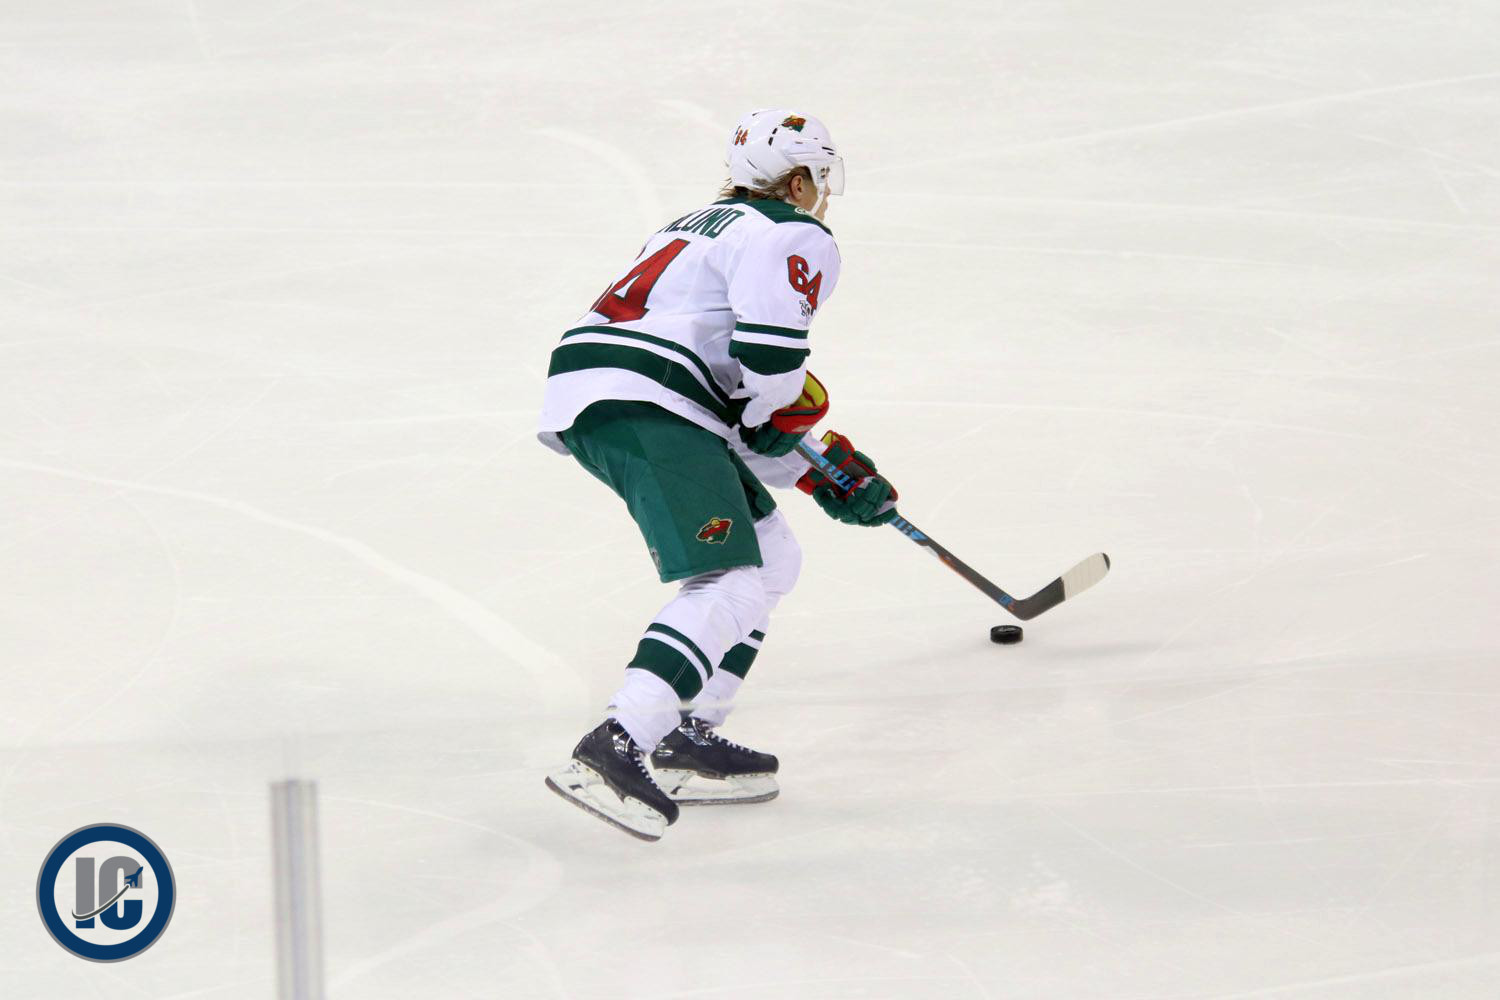 Granlund puts on a show